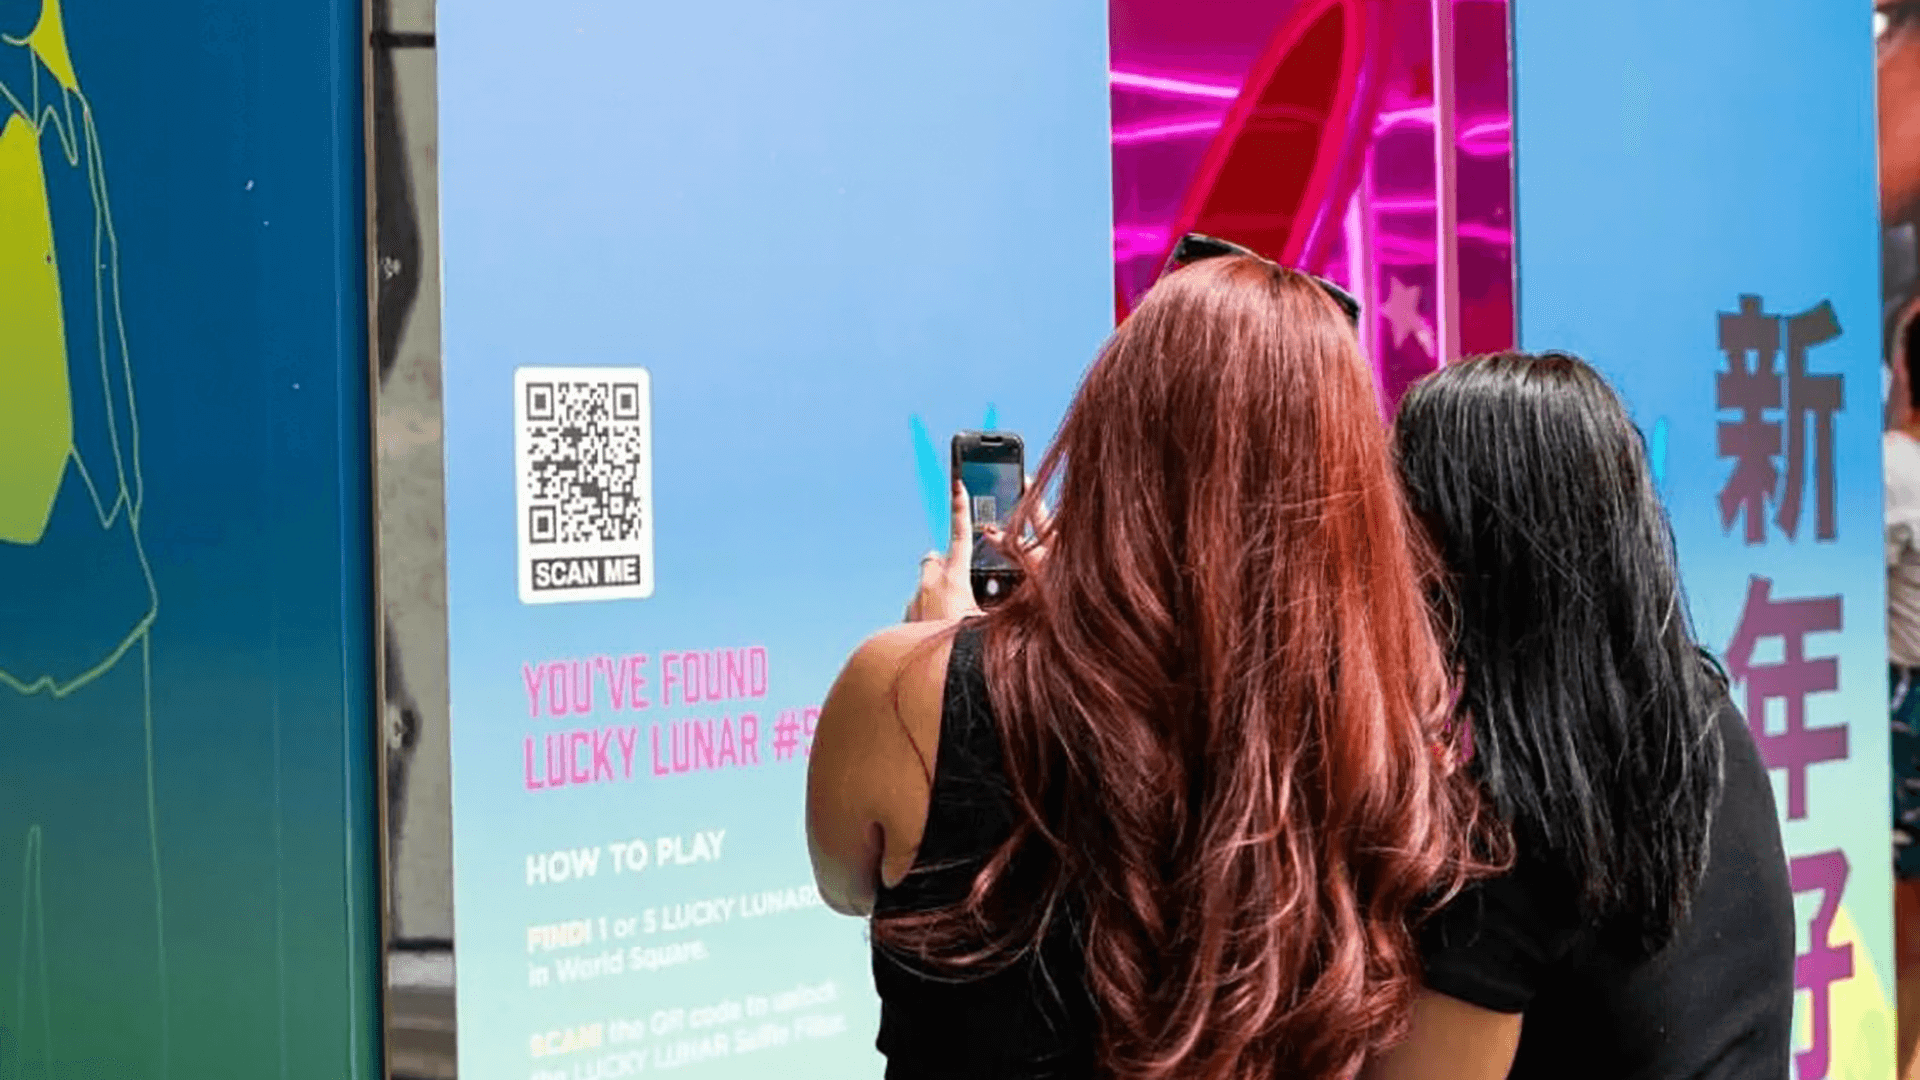 2 women scanning a QR code displayed on the Lucky Lunar experiential brand activation installation at World Square Sydney for Lunar New Year